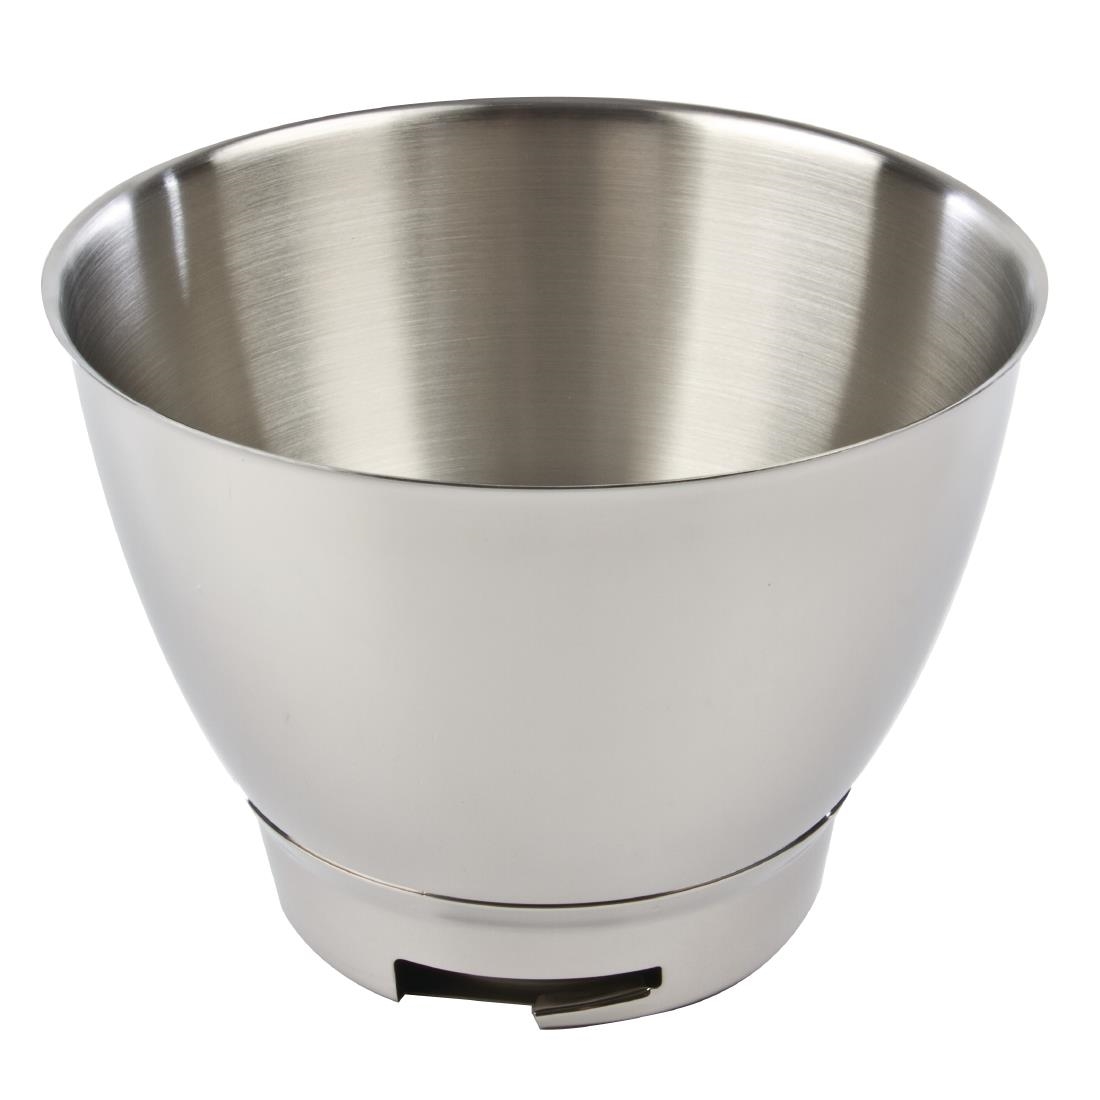 Stainless Steel Bowl For KMC500, KMC510 & KM400 Kenwood Mixers